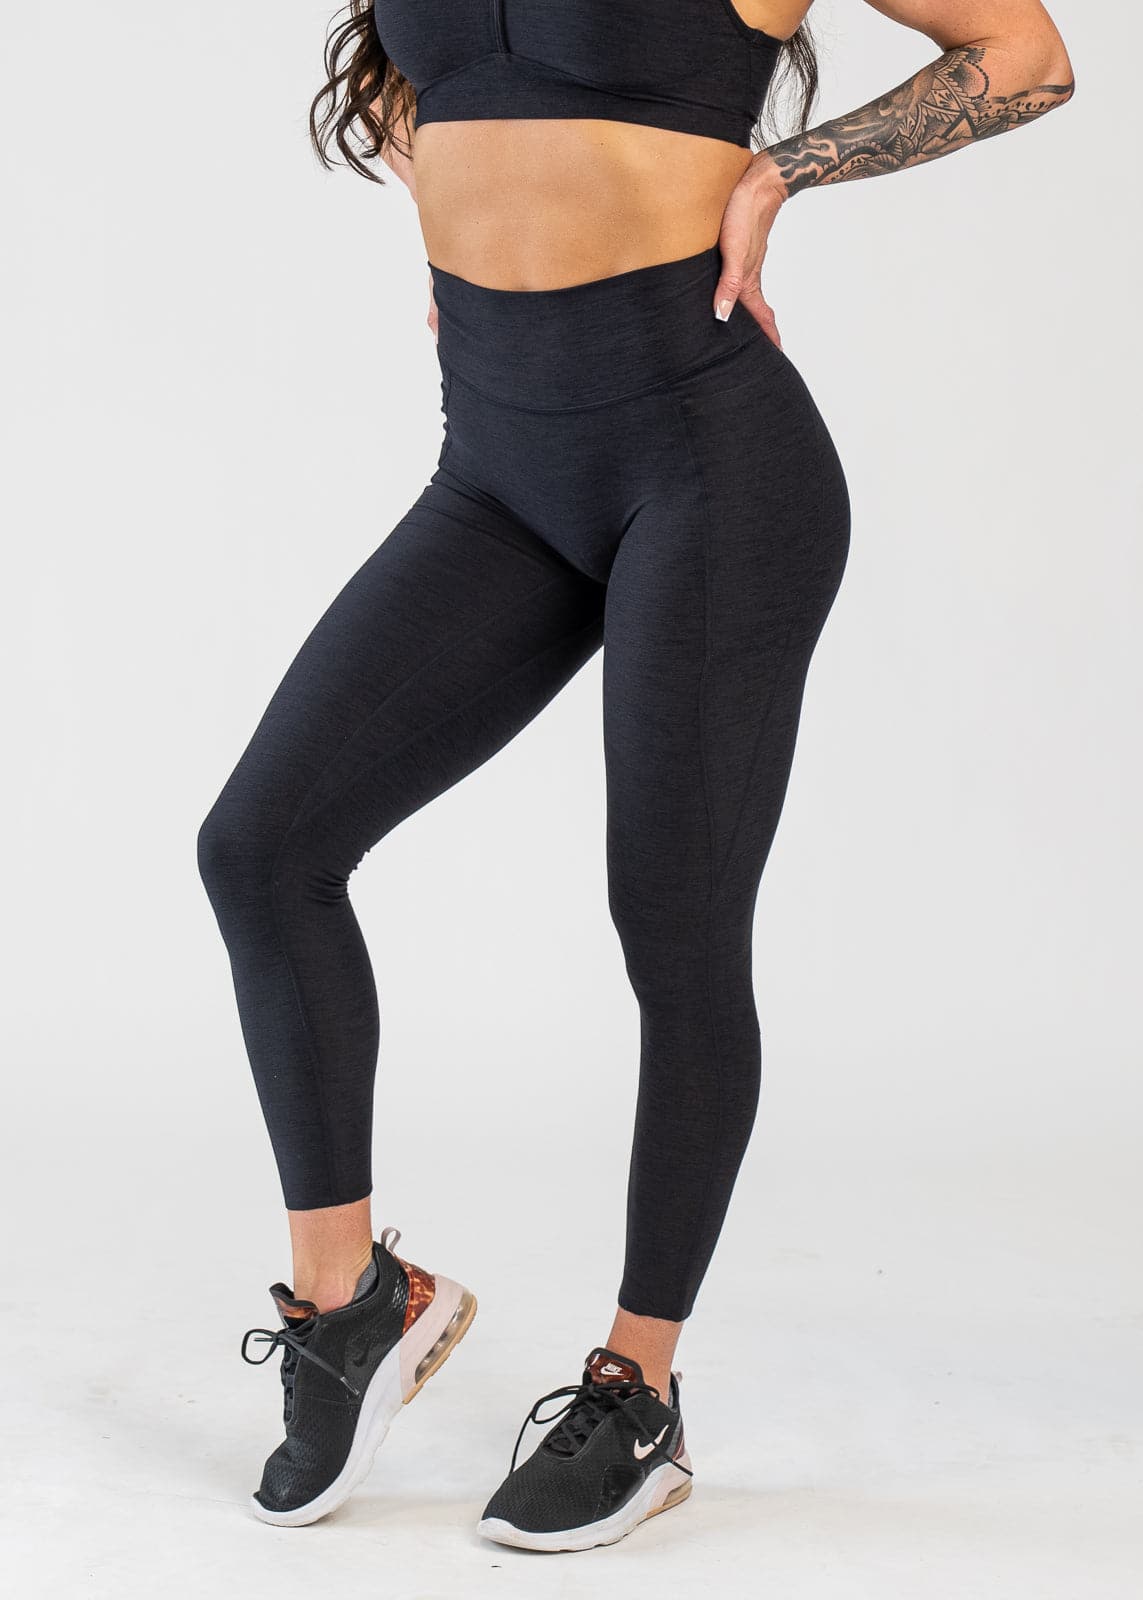 Chest Down 3/4 Front View With One Hand on Lower Back Wearing Dream Leggings With Pockets | Black